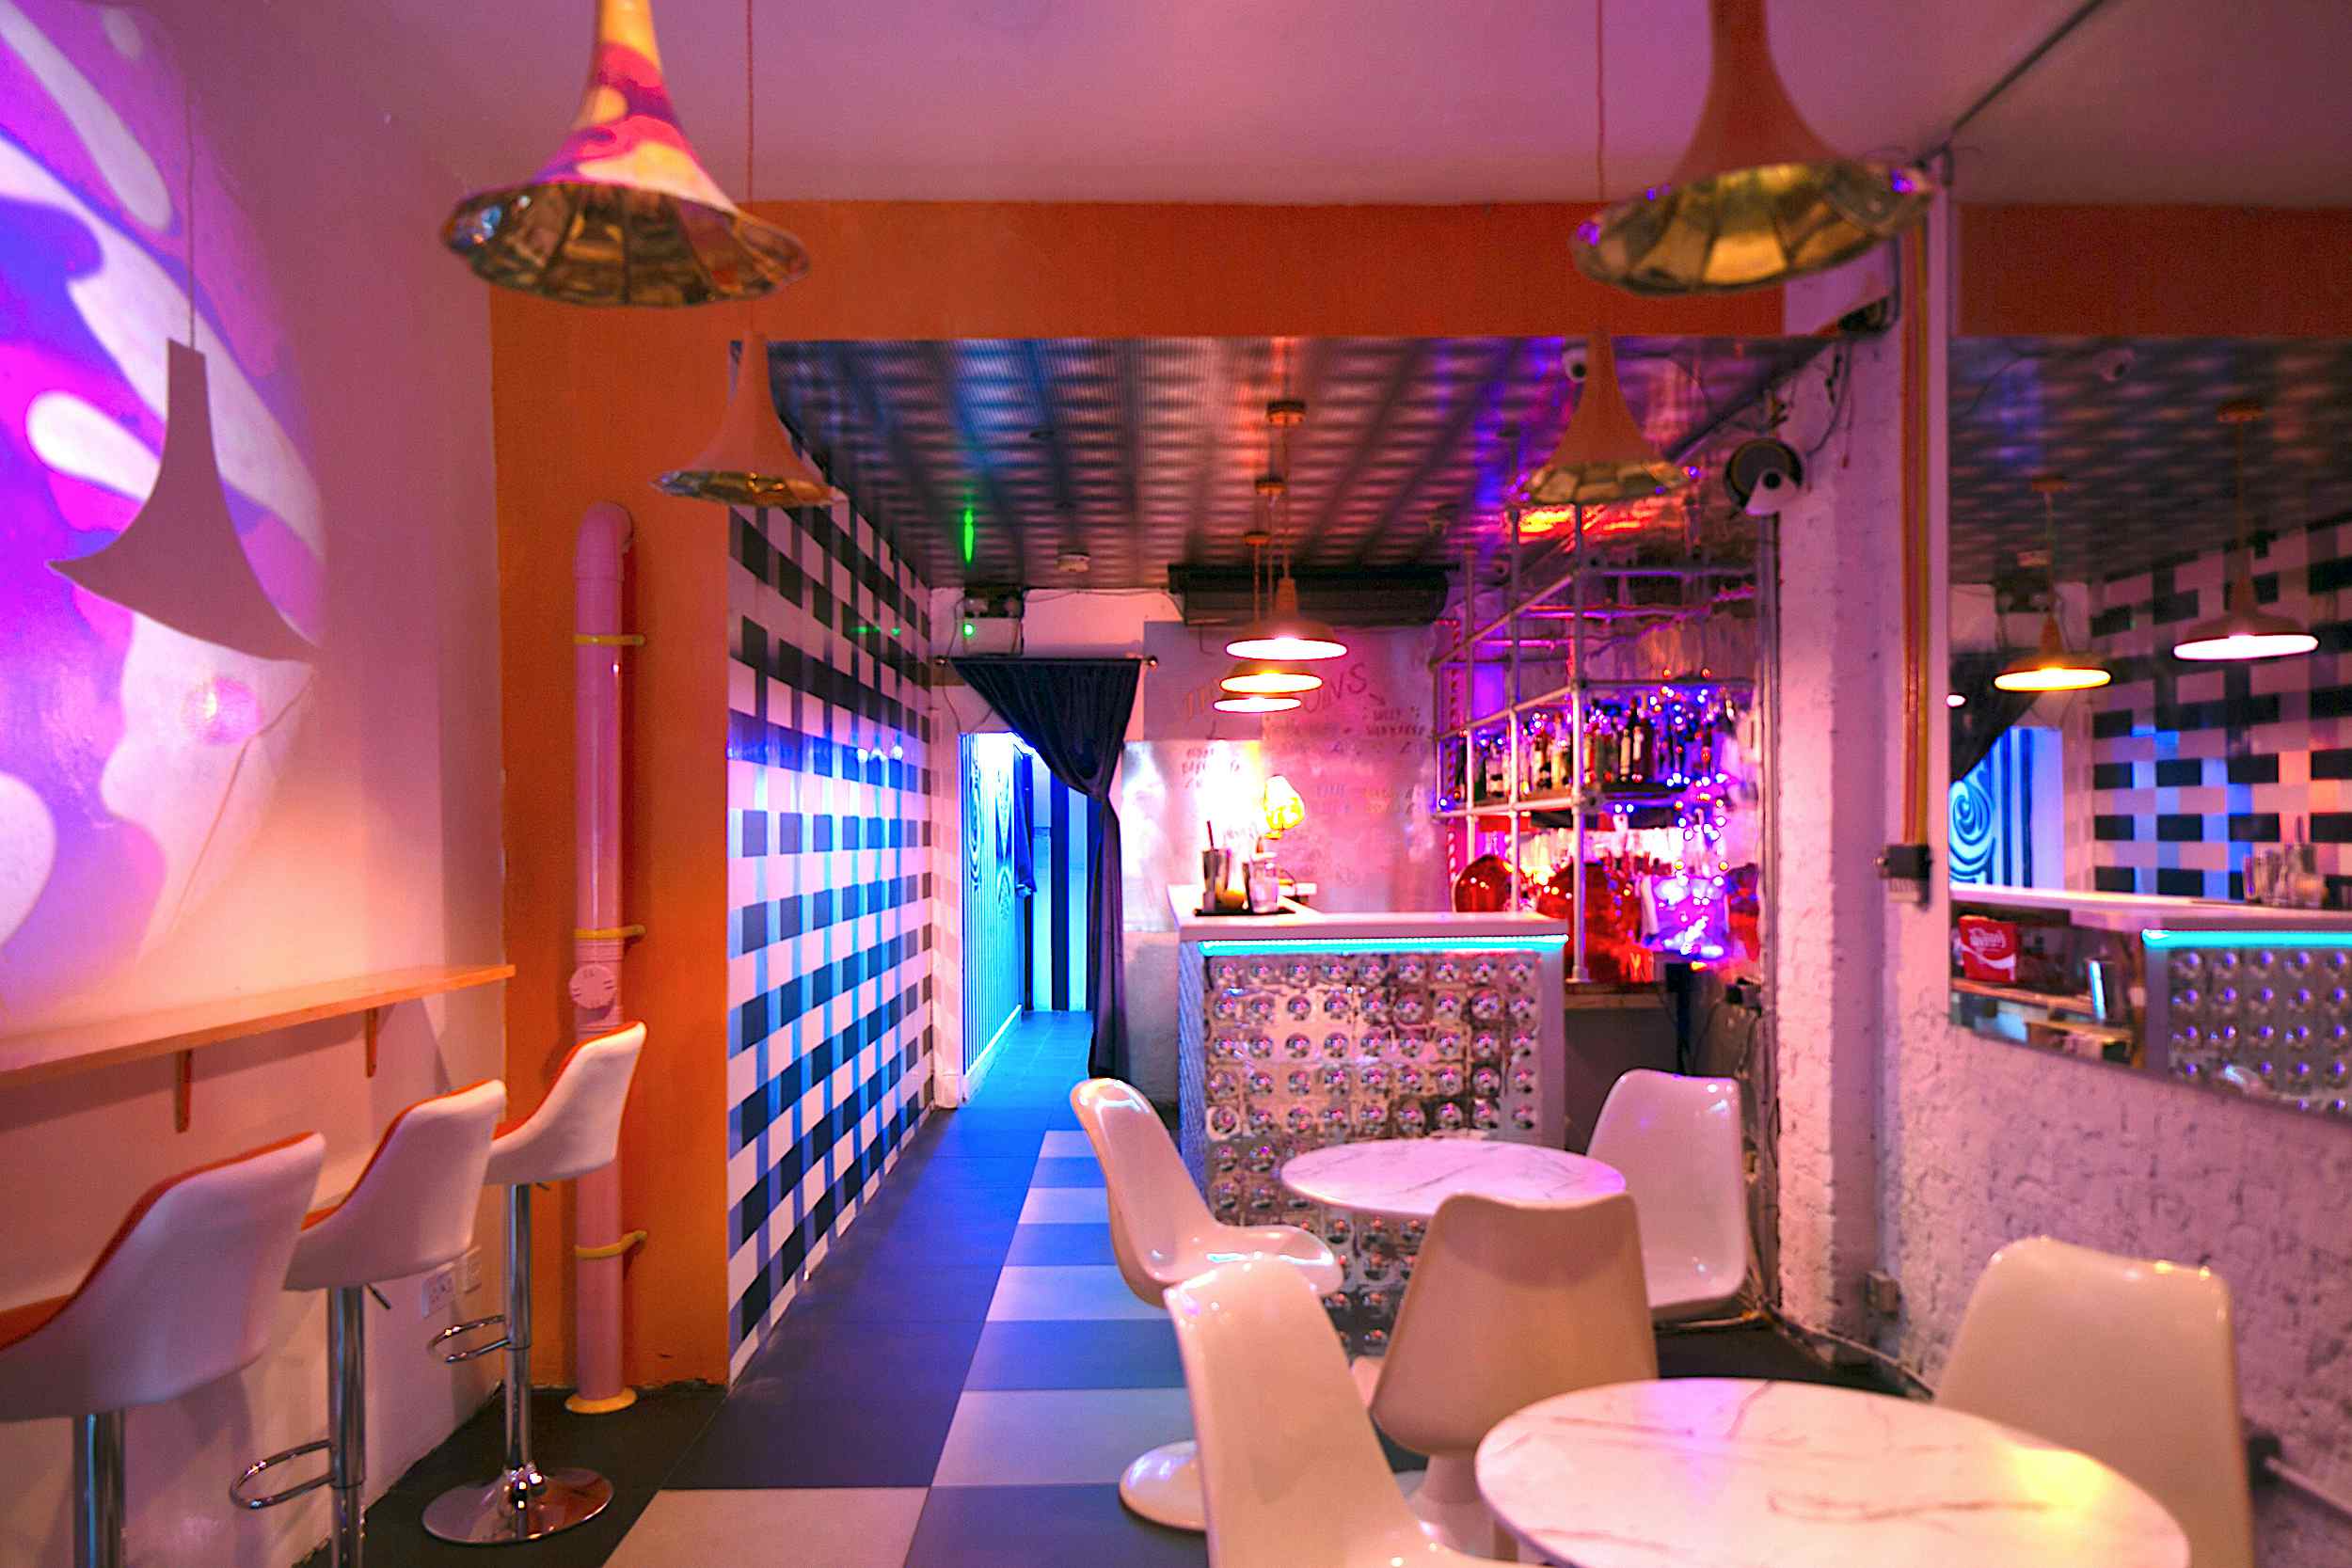 Imagination Room (Downstairs Event Space), Bonkers Bar